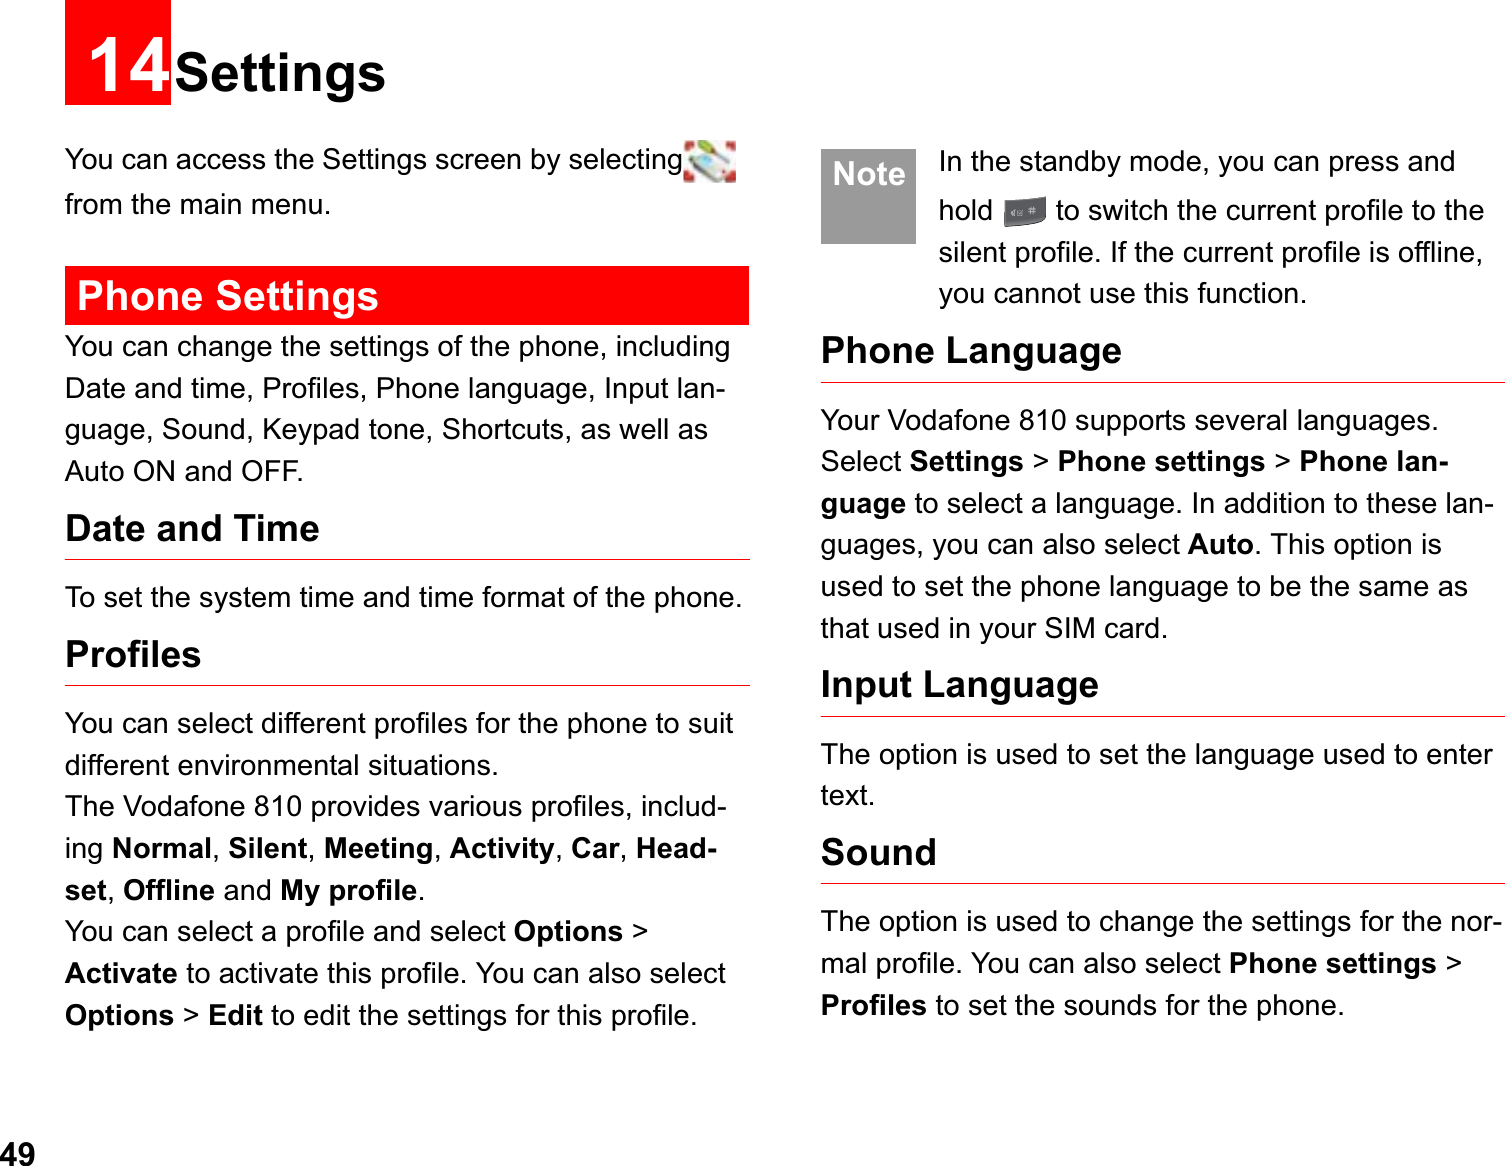 4914SettingsYou can access the Settings screen by selecting from the main menu.Phone SettingsYou can change the settings of the phone, including Date and time, Profiles, Phone language, Input lan-guage, Sound, Keypad tone, Shortcuts, as well as Auto ON and OFF.Date and TimeTo set the system time and time format of the phone.ProfilesYou can select different profiles for the phone to suit different environmental situations.The Vodafone 810 provides various profiles, includ-ing Normal,Silent,Meeting,Activity,Car,Head-set,Offline and My profile.You can select a profile and select Options &gt; Activate to activate this profile. You can also select Options &gt; Edit to edit the settings for this profile.  Note In the standby mode, you can press and hold   to switch the current profile to the silent profile. If the current profile is offline, you cannot use this function.Phone Language Your Vodafone 810 supports several languages. Select Settings &gt; Phone settings &gt;Phone lan-guage to select a language. In addition to these lan-guages, you can also select Auto. This option is used to set the phone language to be the same as that used in your SIM card.Input Language The option is used to set the language used to enter text. SoundThe option is used to change the settings for the nor-mal profile. You can also select Phone settings &gt; Profiles to set the sounds for the phone.